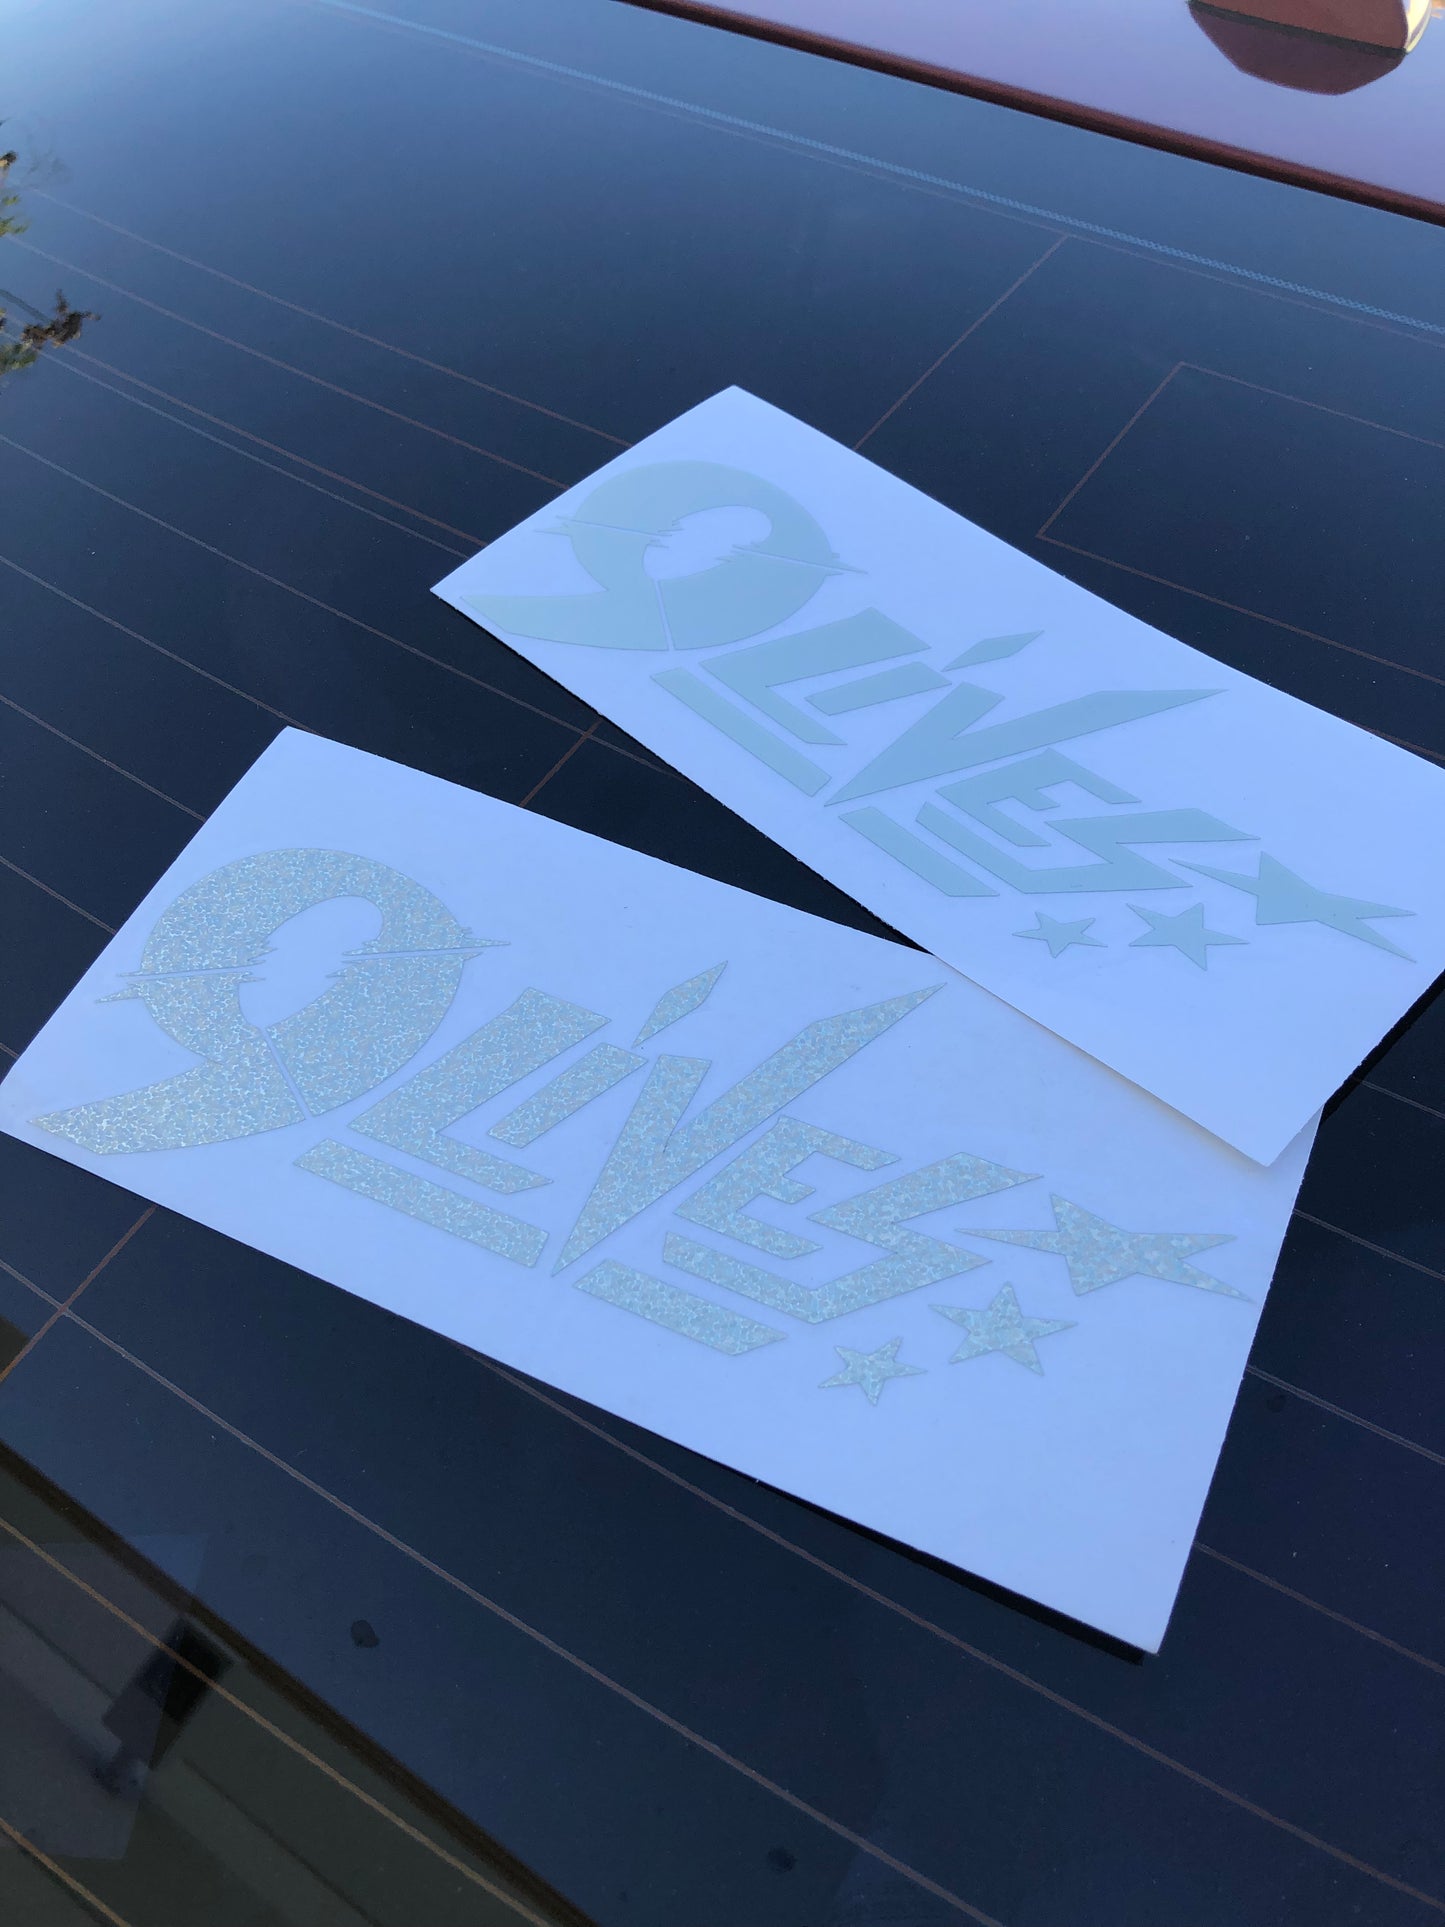 Striker Style "9LIVES" Decal